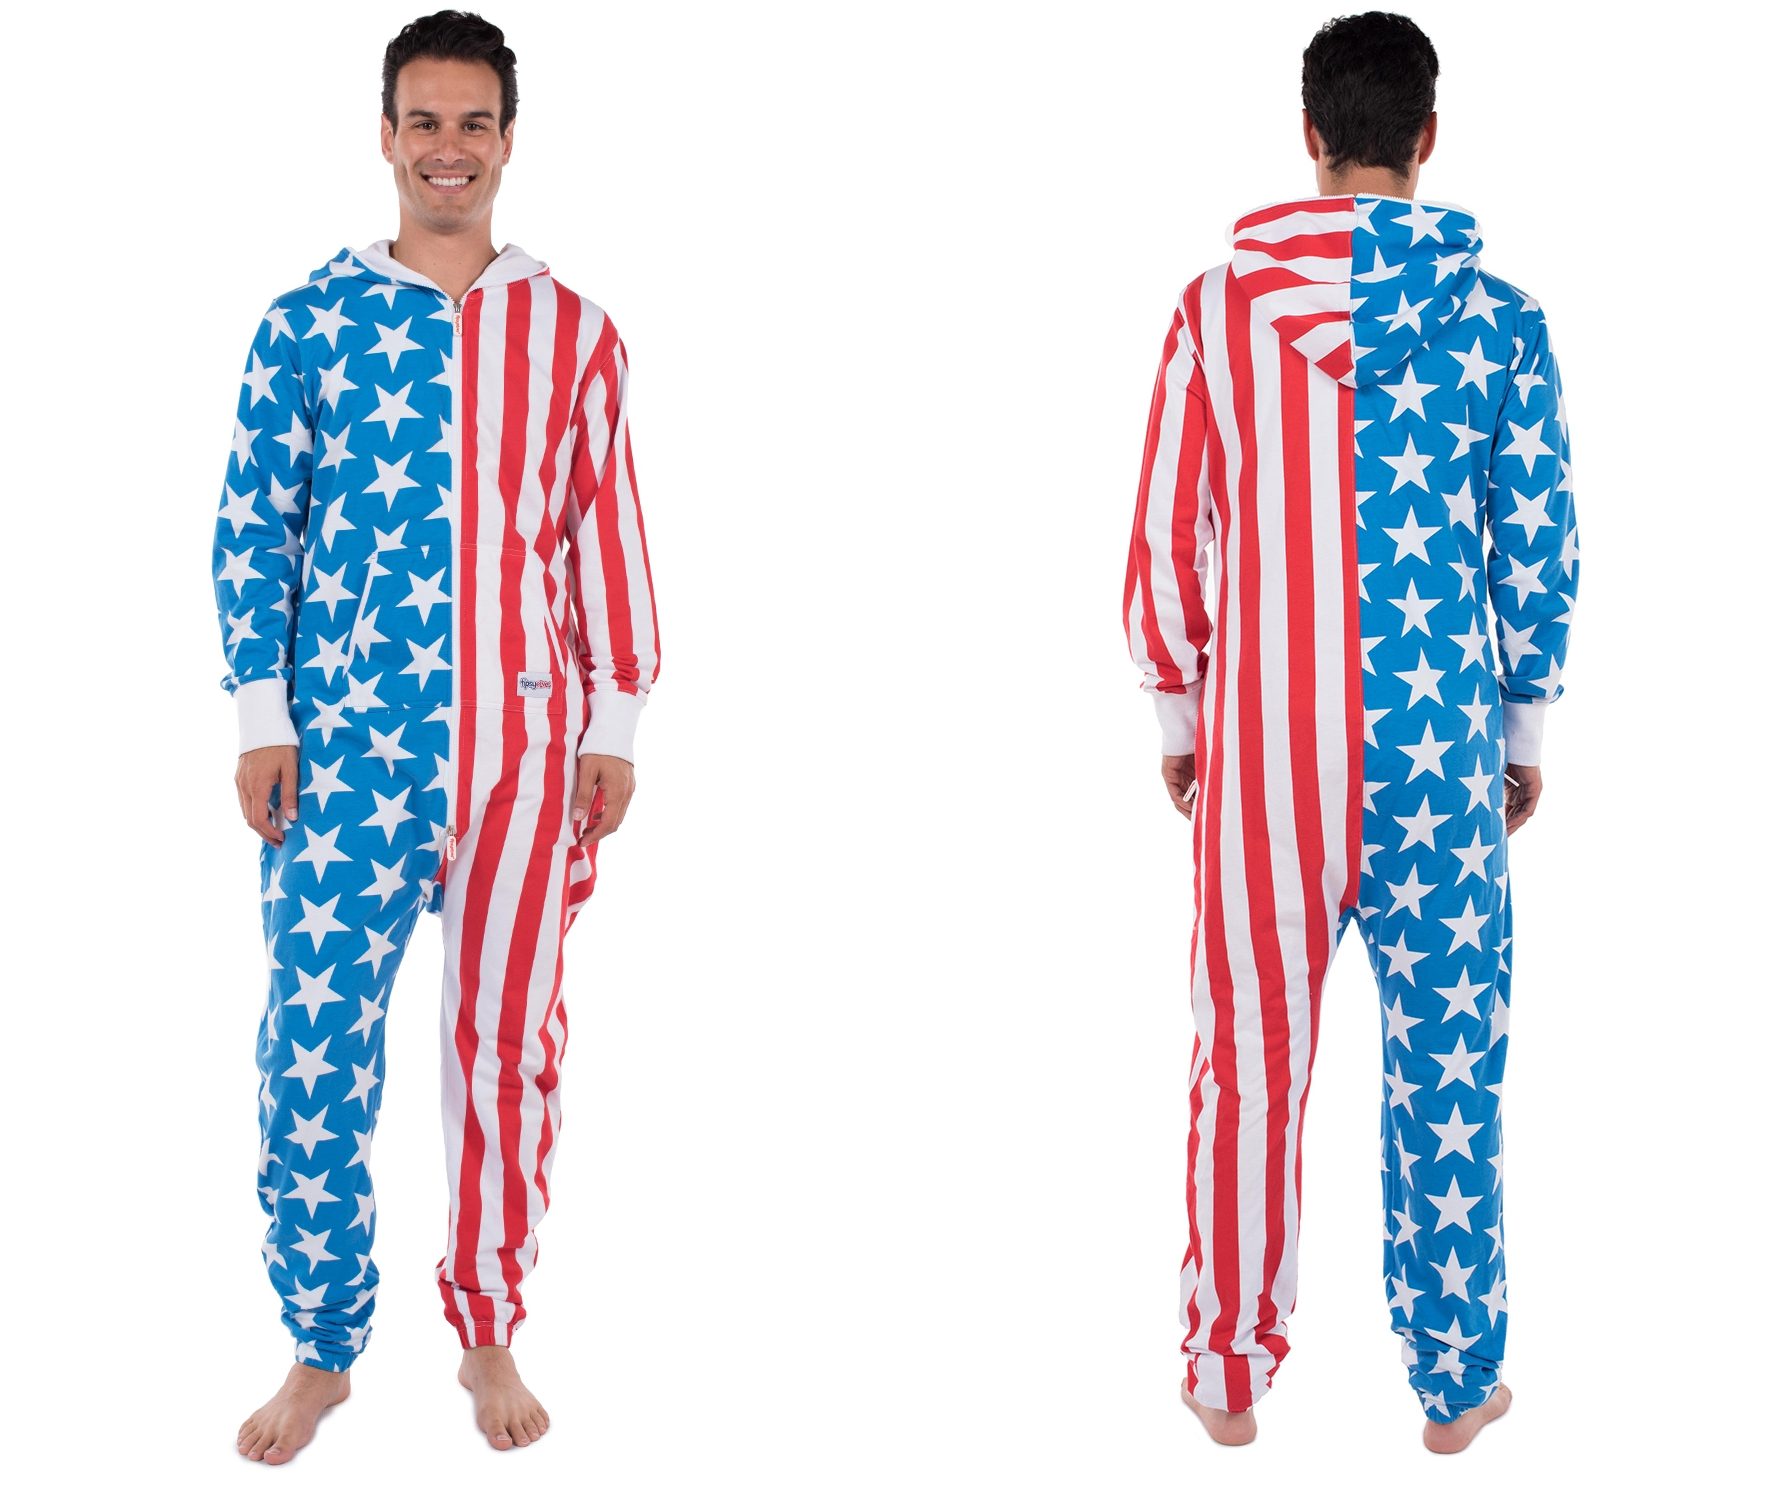 FUUNY 4th of July Outfits